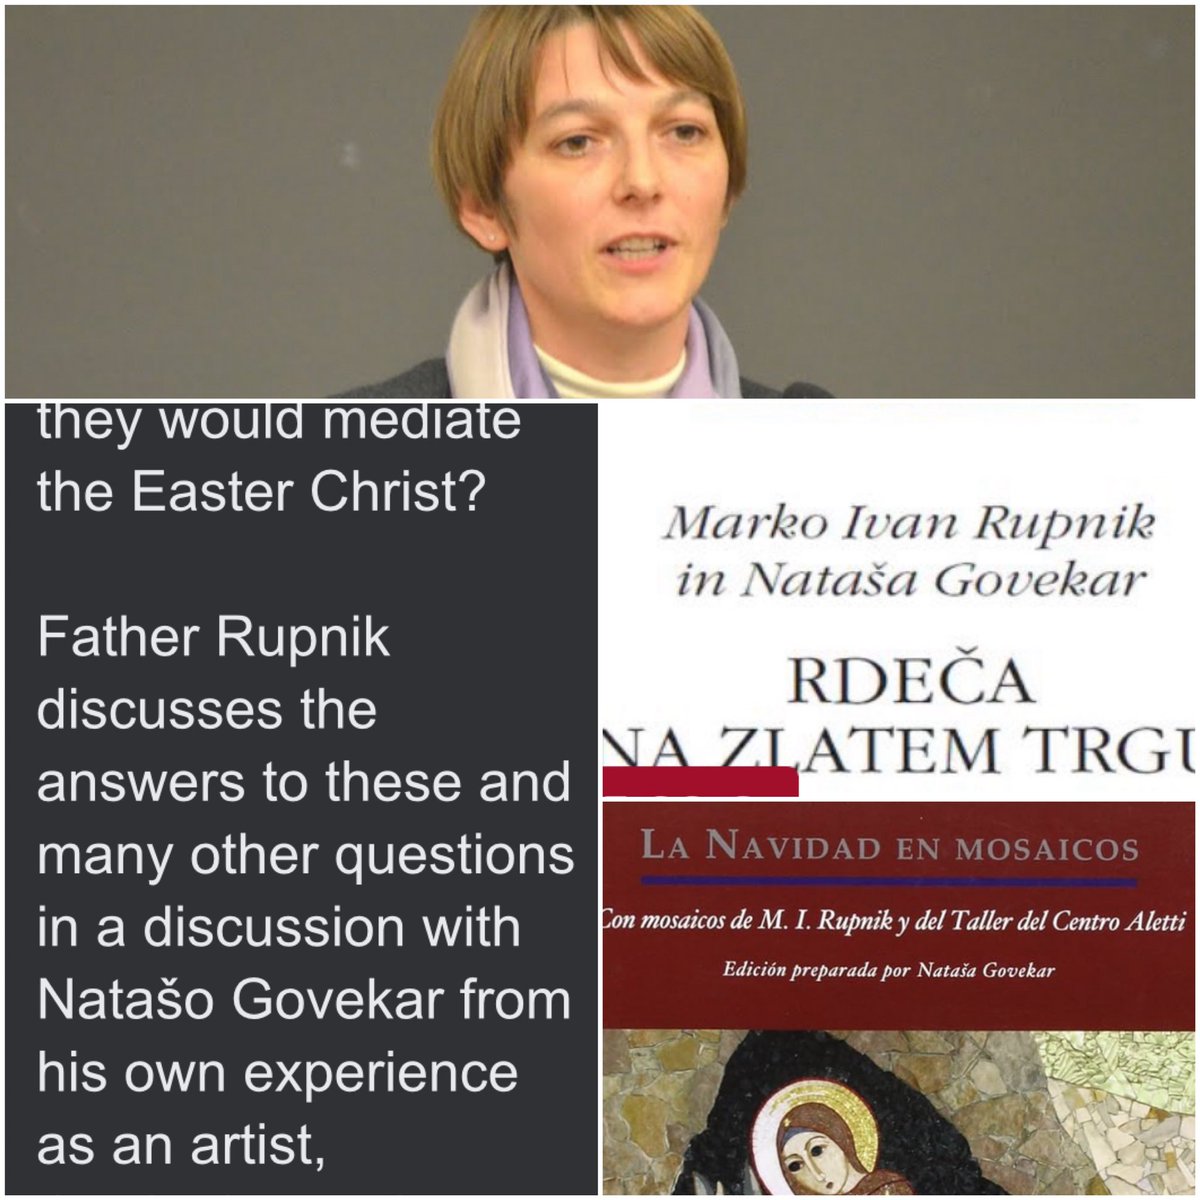 Natasa Govekar, very senior Vatican communications official, is an associate of #Rupnik, co-author of books on his ‘theology’ and works closely with @VaticanNews, which disgustingly continues to promote his vile mosaics.